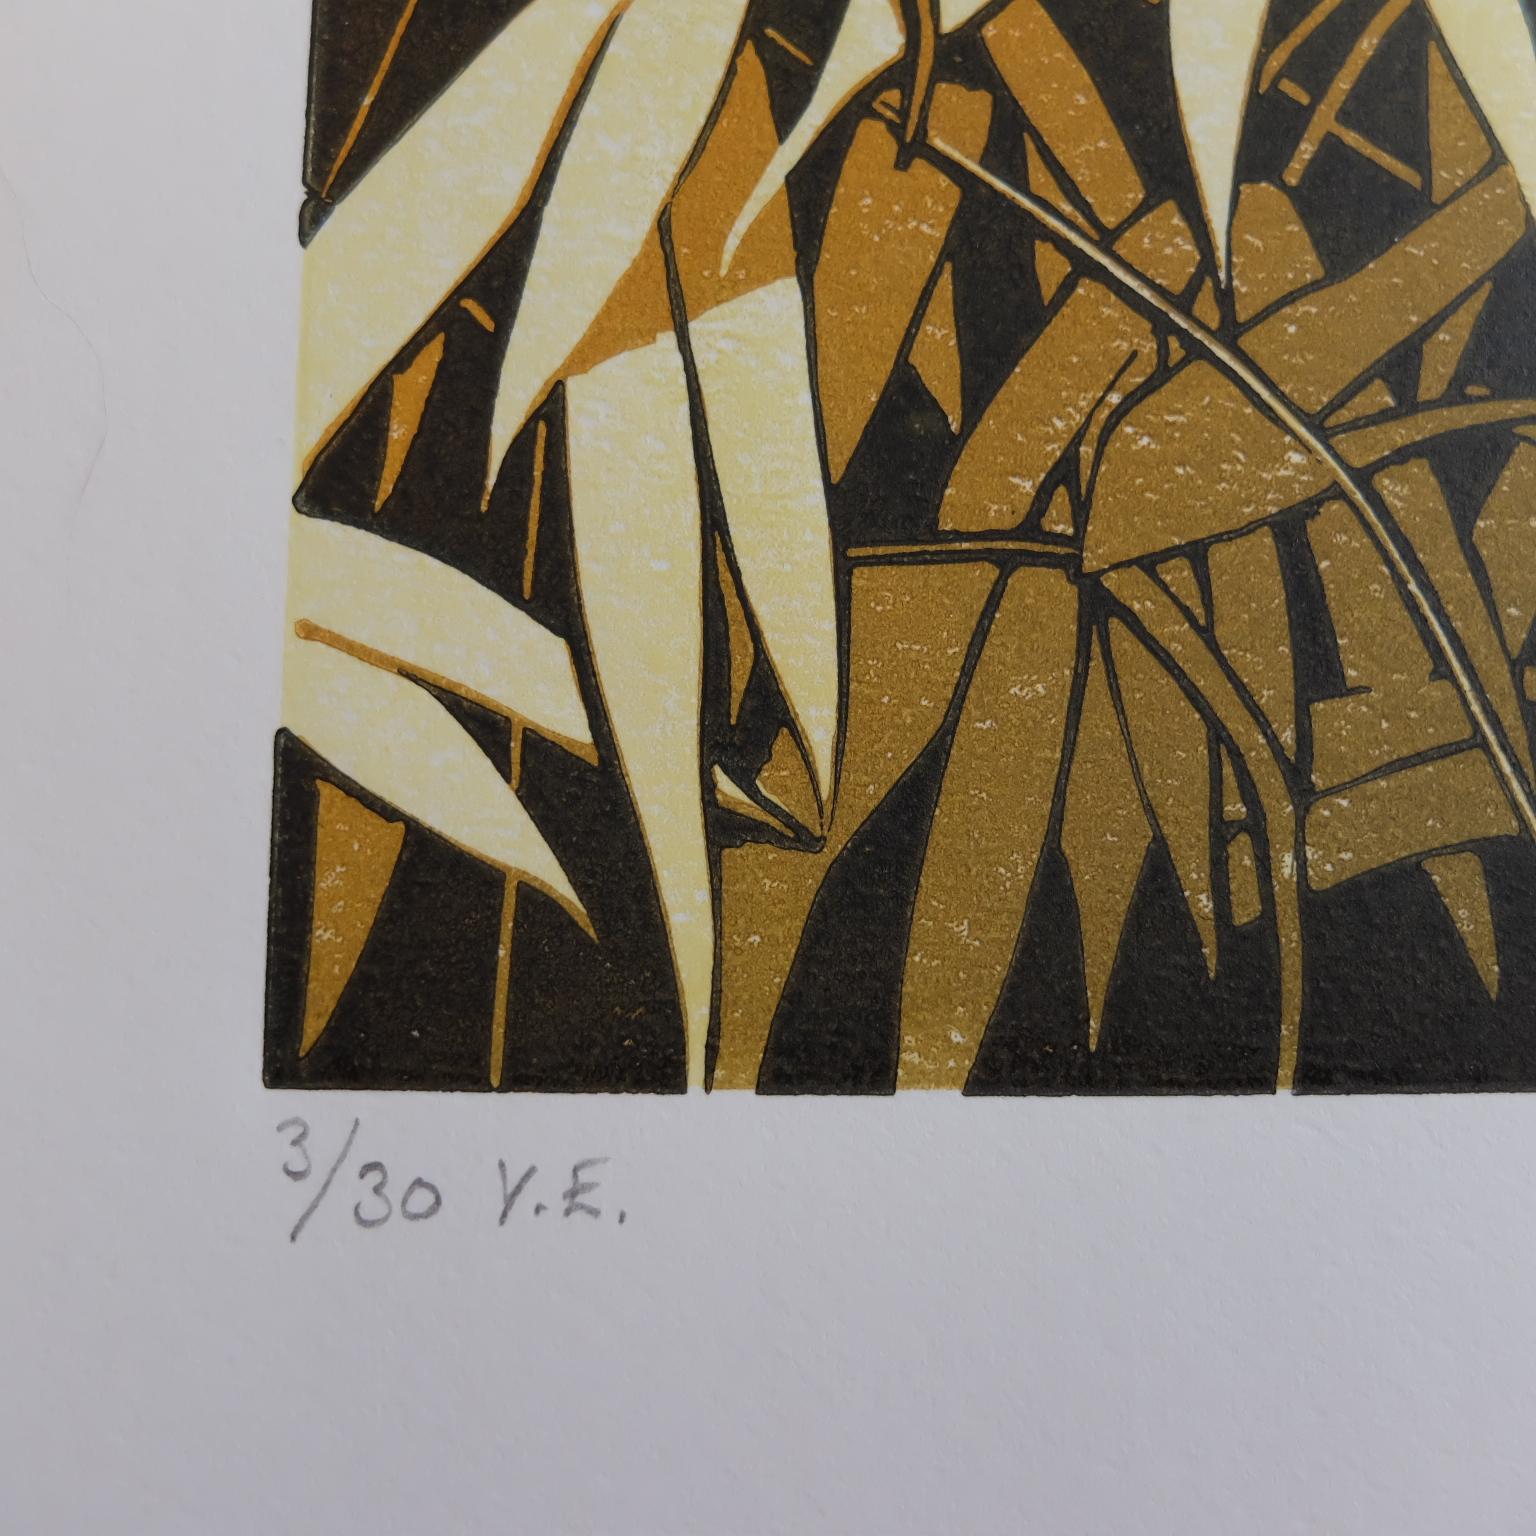 Susan Noble
Autumn Ferns
Linocut.
Edition of 30.
Image Size 30.5 x 30.5cm.
Paper Size (approx.): 36 x 36cm.
Oil based inks on Zerkall Extra Smooth Paper, 145gsm.
Signed, dated and numbered on the front.
Edition numbers may vary from the photo.
Sold